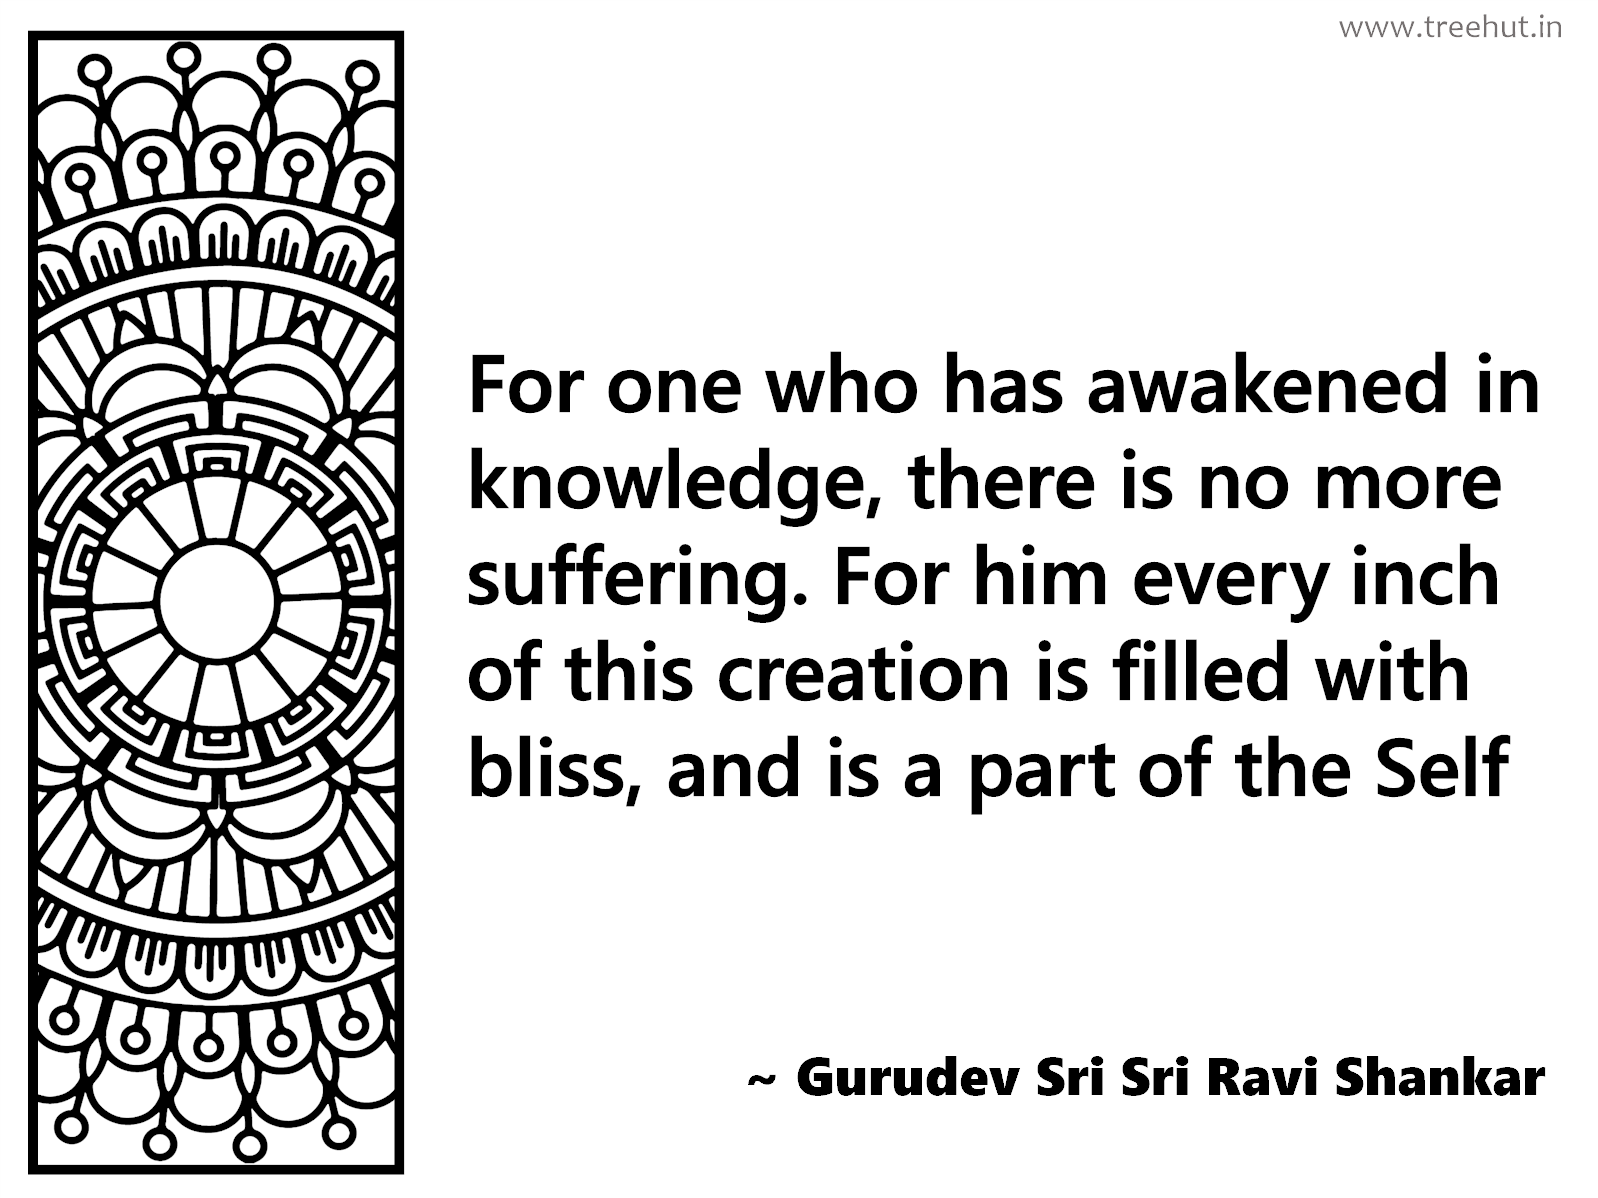 For one who has awakened in knowledge, there is no more suffering. For him every inch of this creation is filled with bliss, and is a part of the Self Inspirational Quote by Gurudev Sri Sri Ravi Shankar, coloring pages